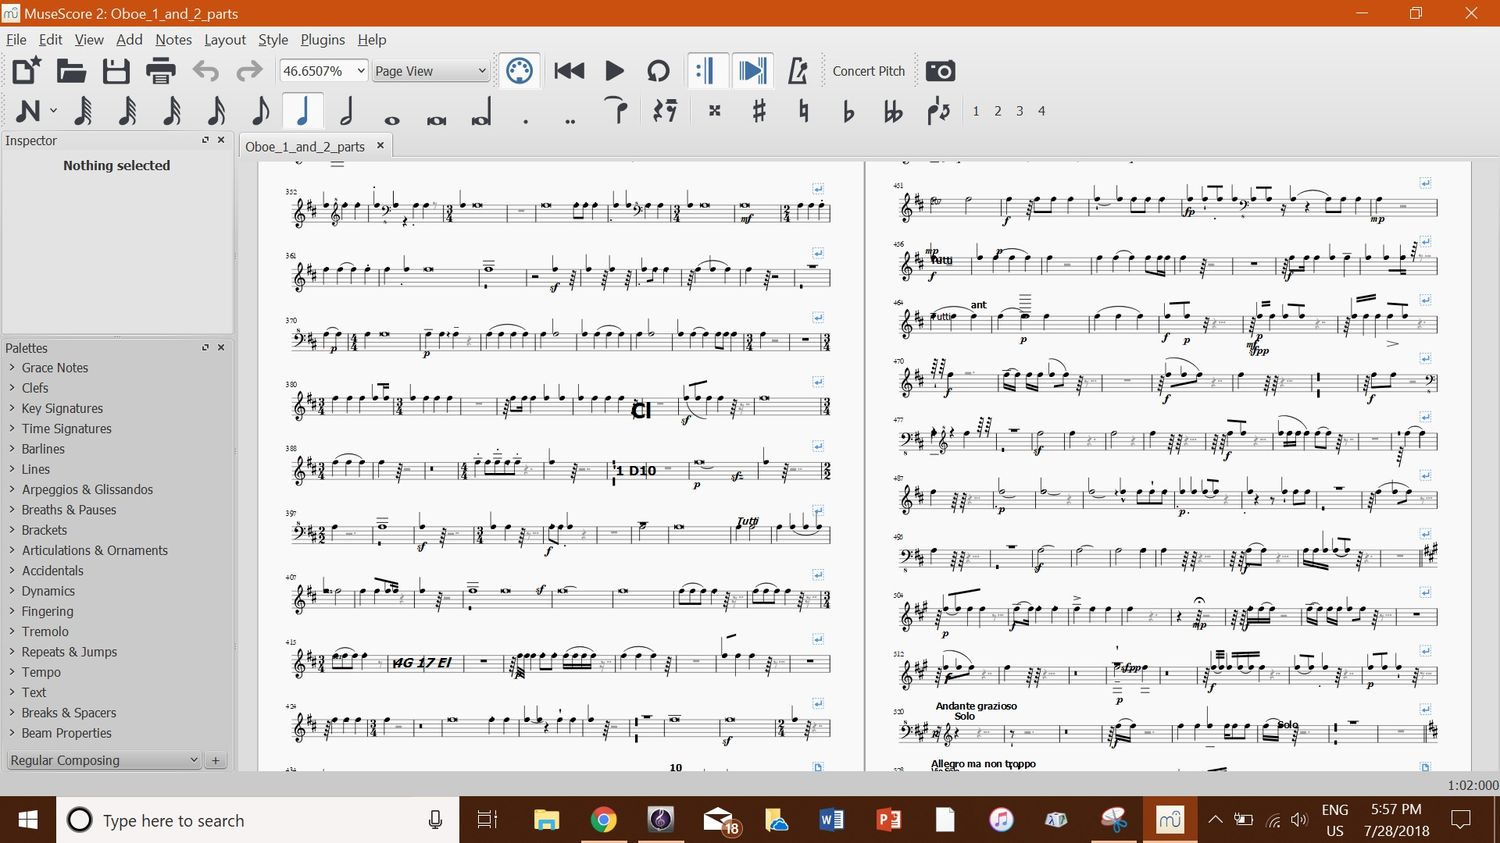 How To Import Sheet Music Into Musescore